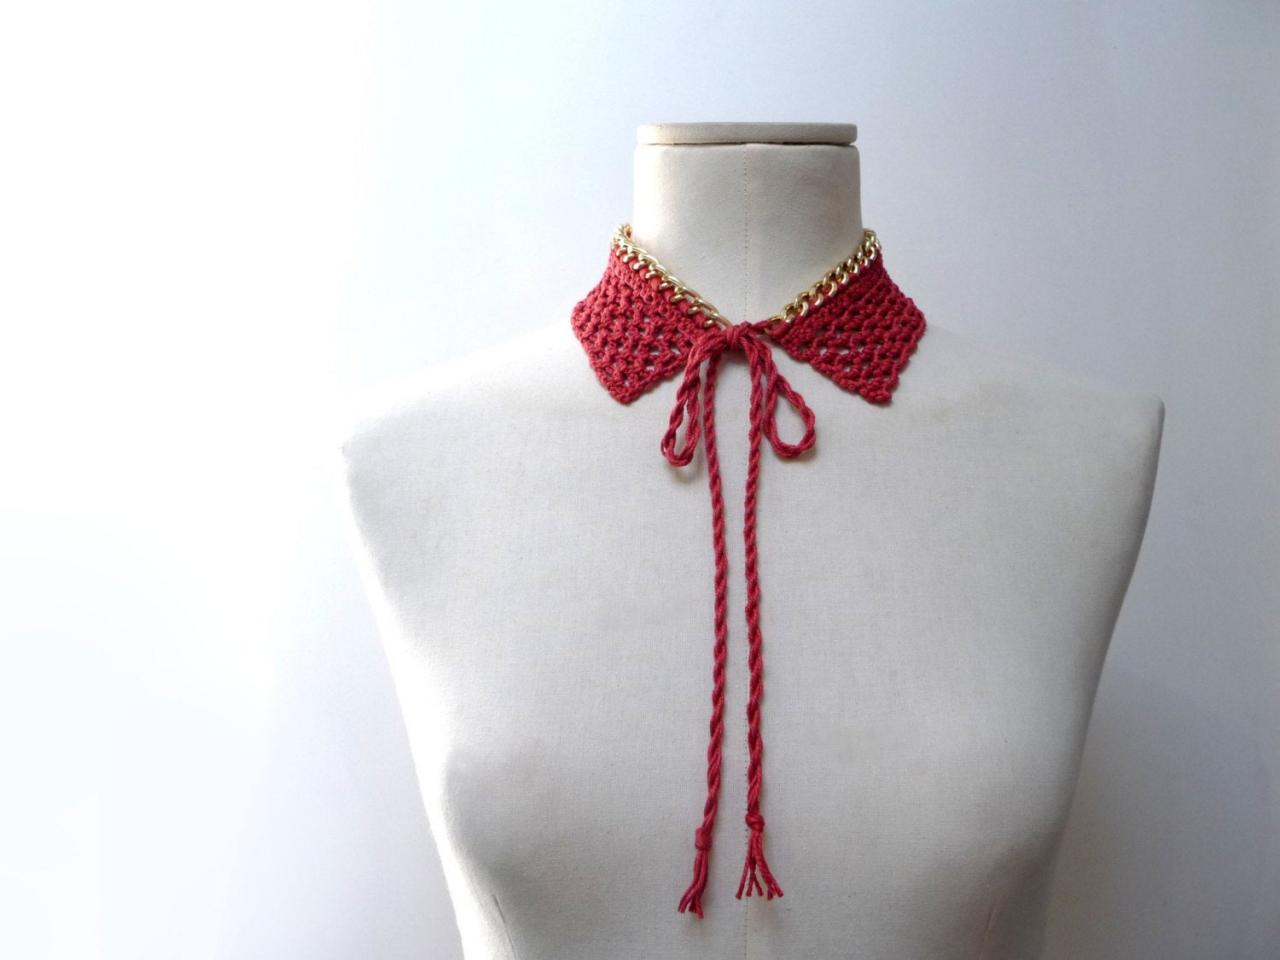 Crochet Collar Necklace - Gold Metal Chain And Orange / Rusty Brown / Brick Red Cotton